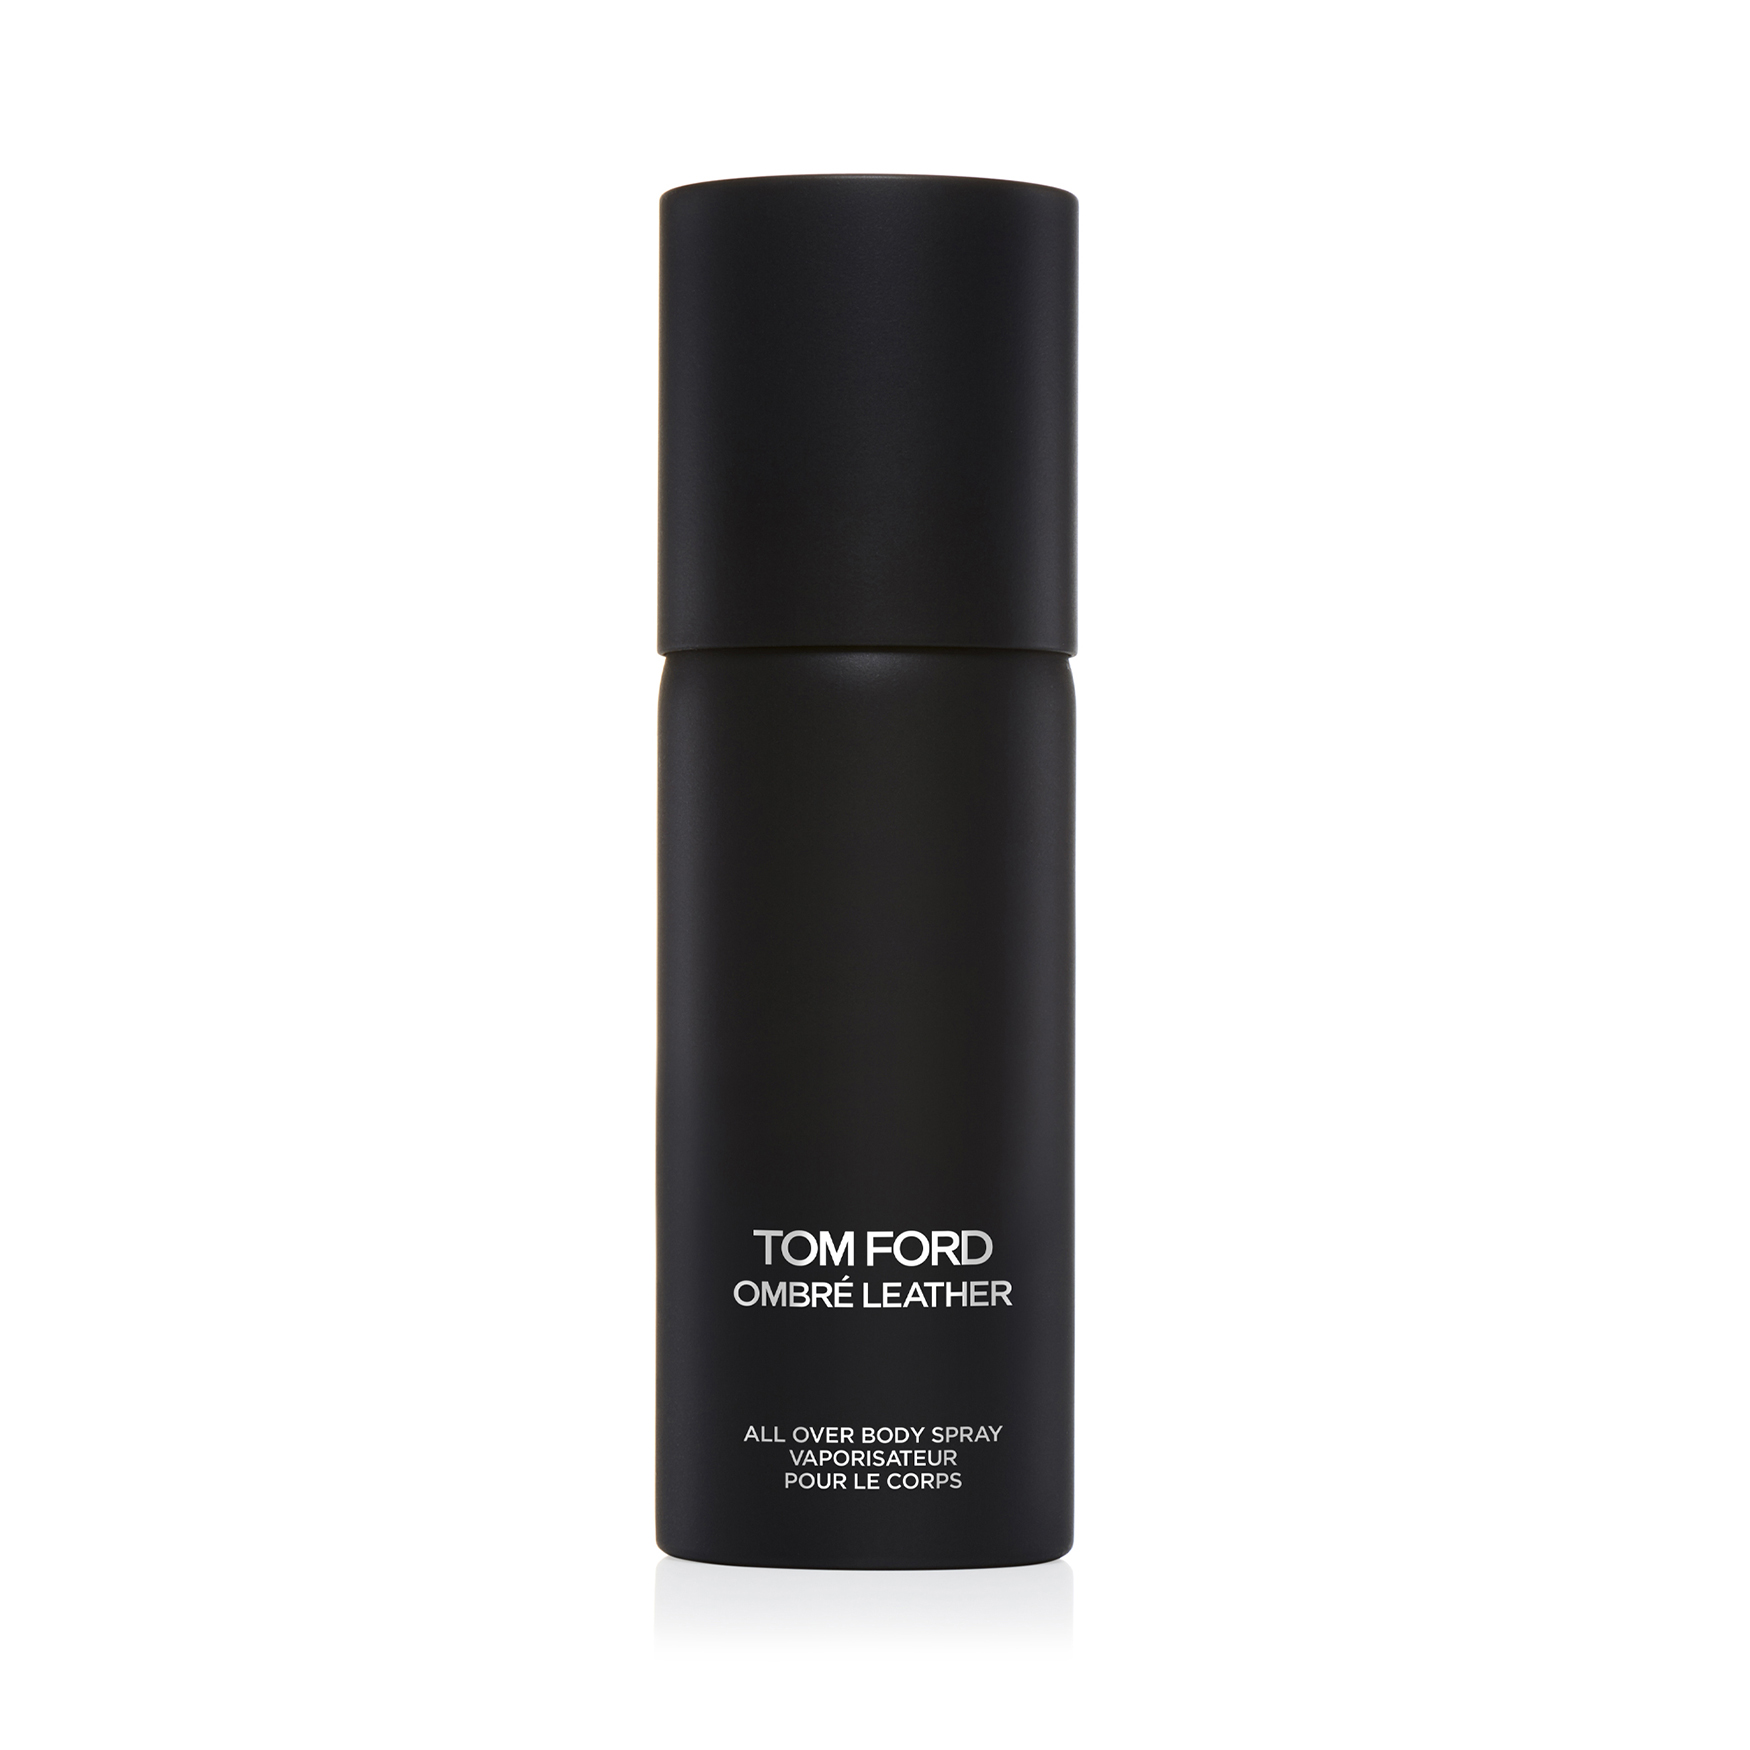 Tom Ford Ombre Leather Body Spray | Space NK